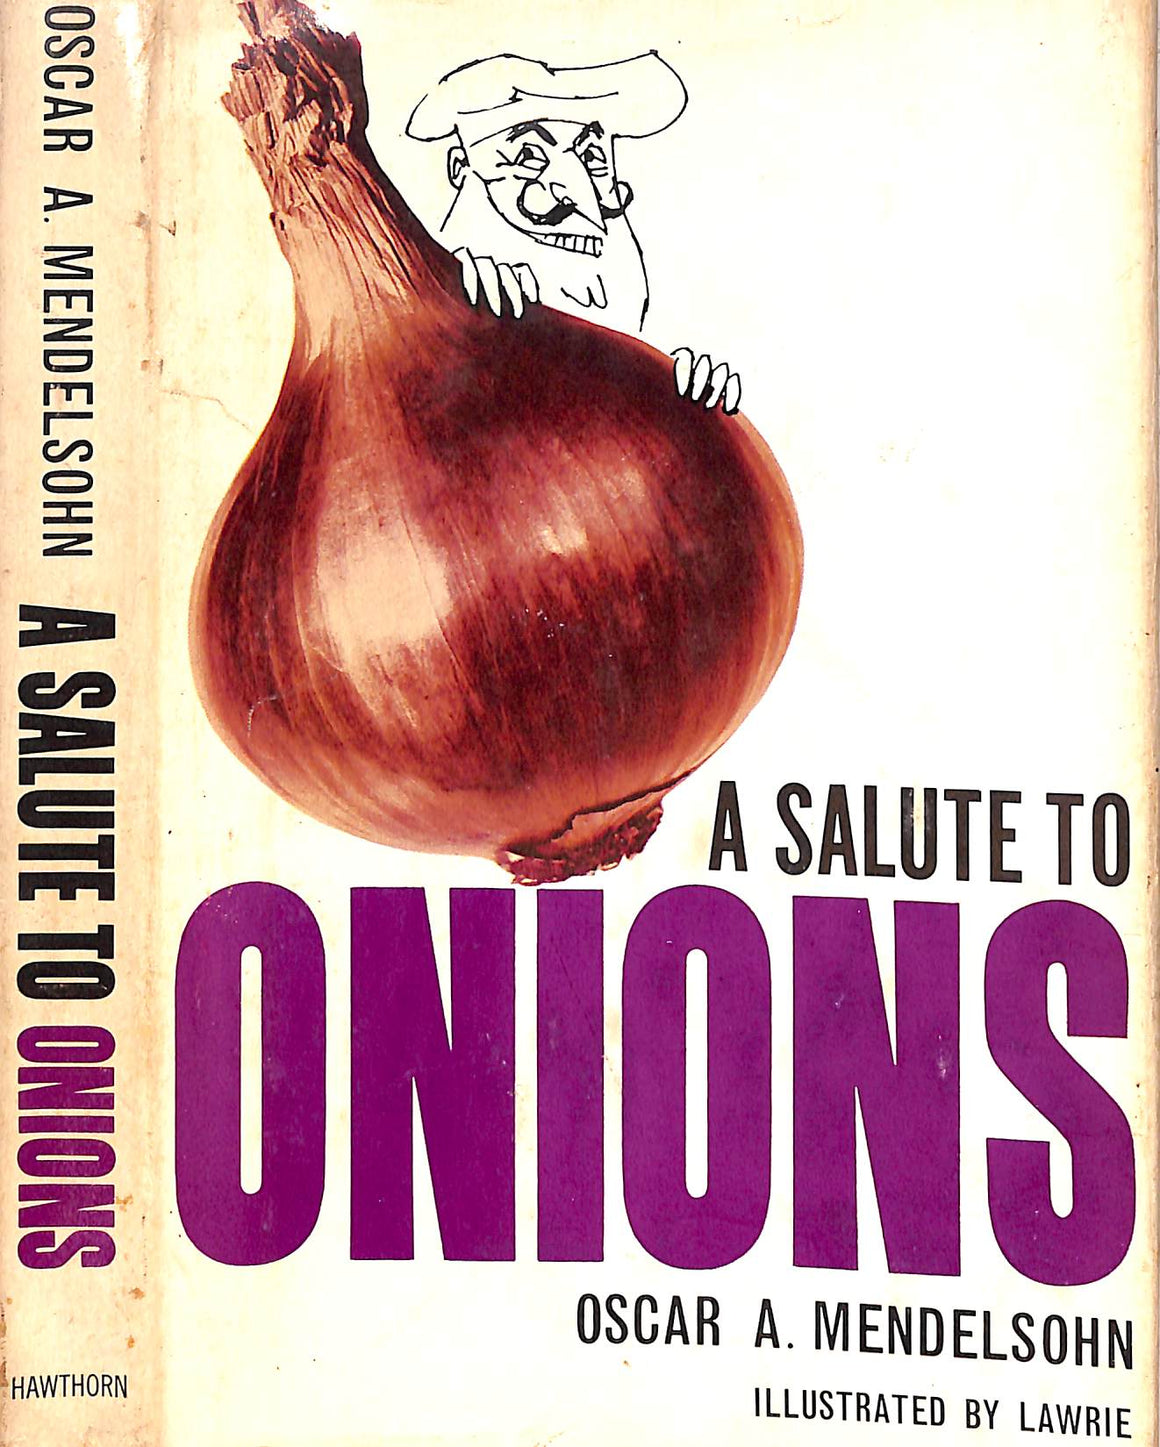 "A Salute To Onions Some Reflections On Cookery... And Cooks" 1965 MENDELSOHN, Oscar A.